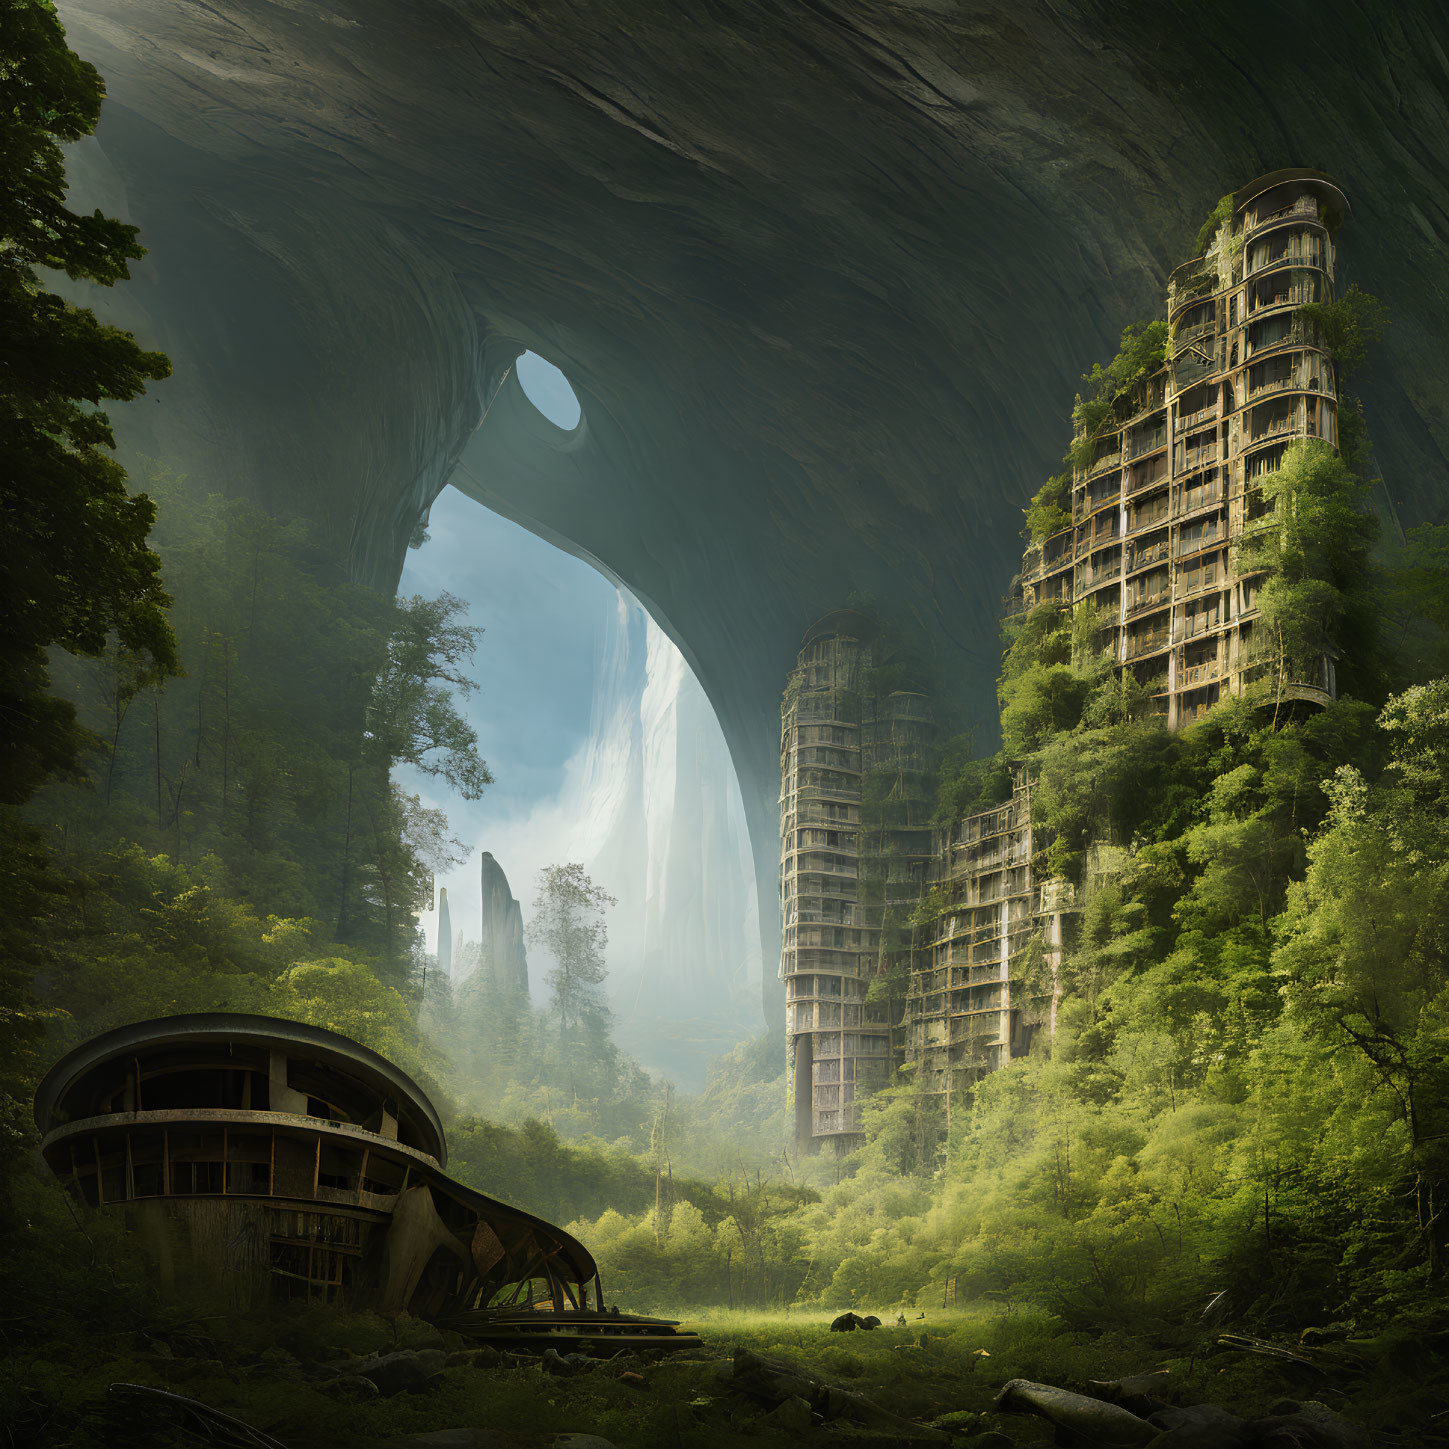 Sunlit cavern with lush forest and futuristic buildings merging into nature